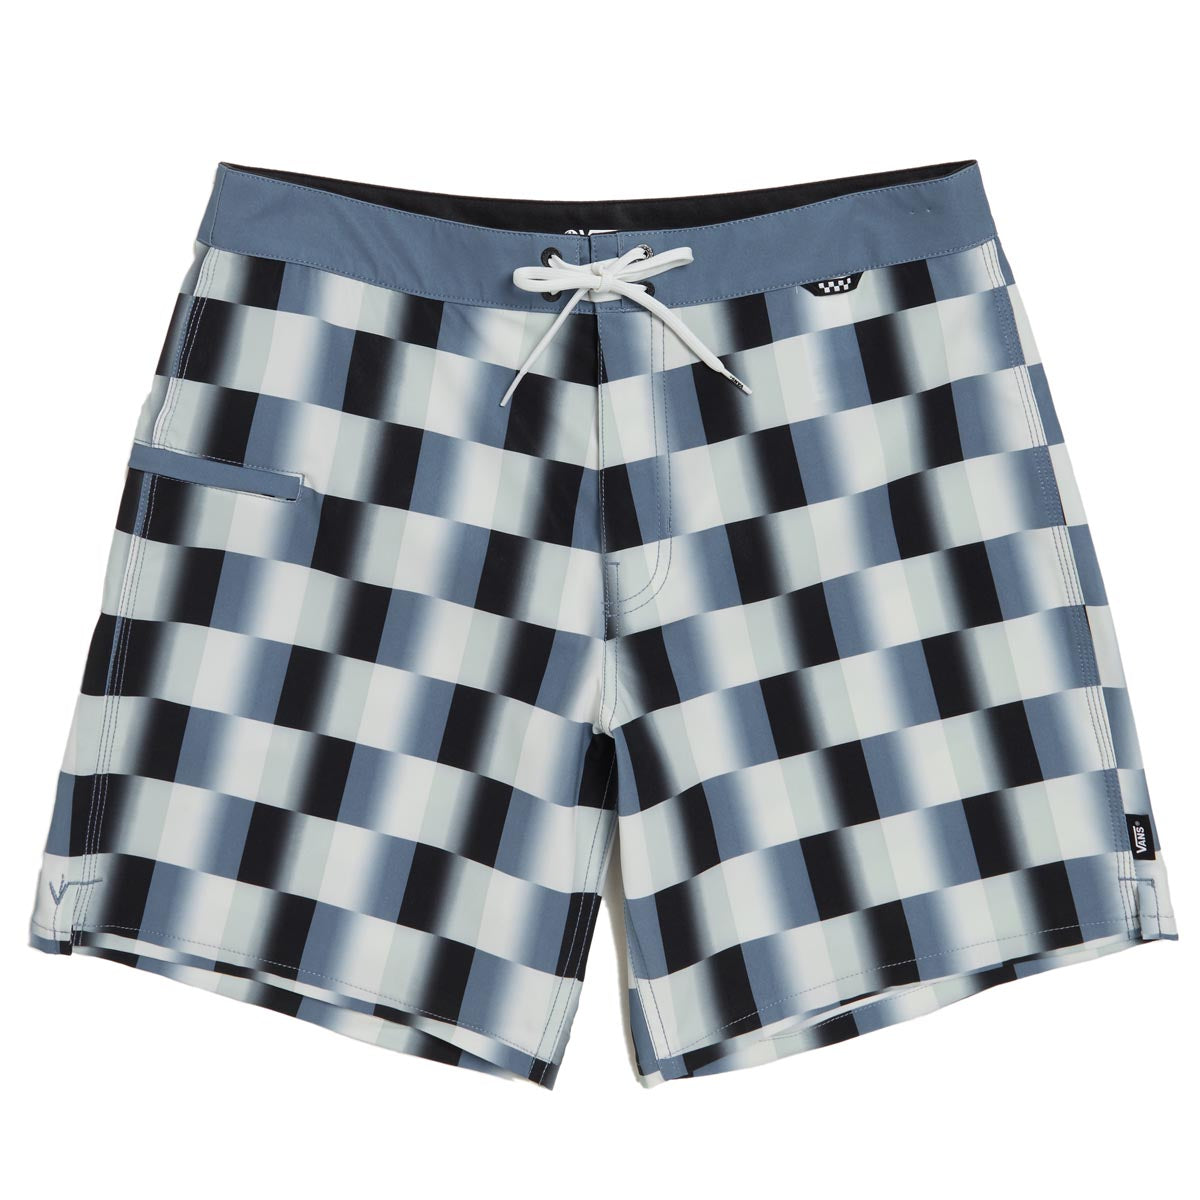 Vans The Daily Check Board Shorts - Copen Blue image 1